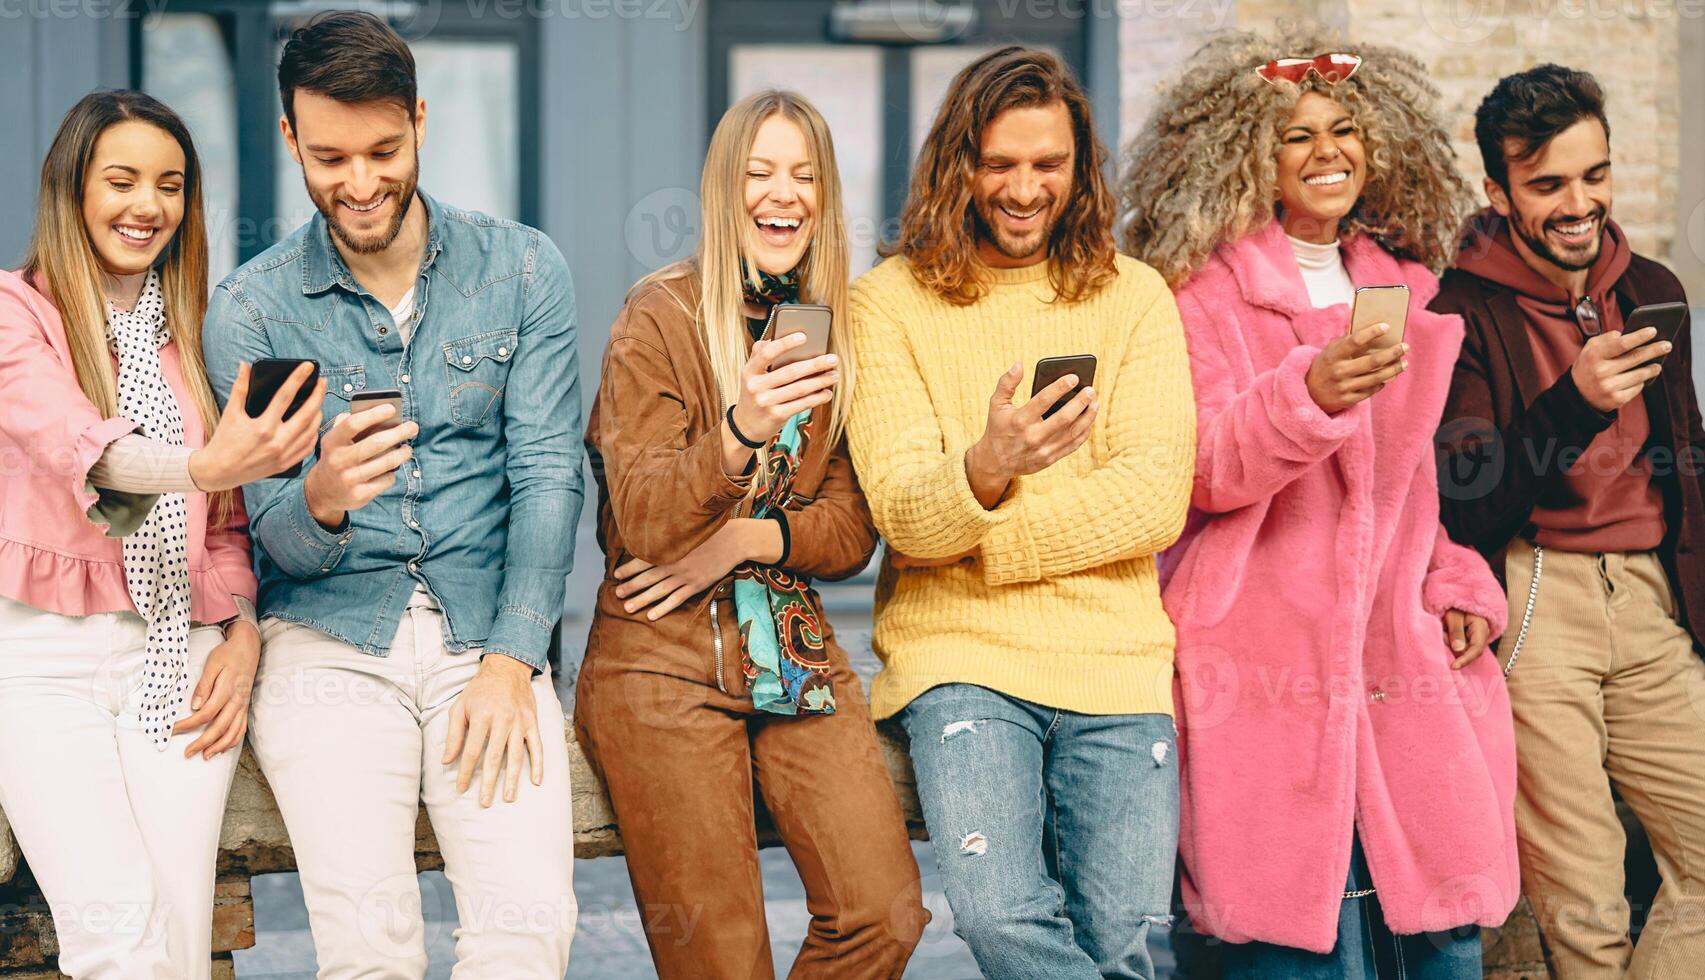 Group of trendy friends using mobile smartphones outdoor - Millennial young people having fun with new technology apps for social media - Concept of youth culture generation z and technology photo